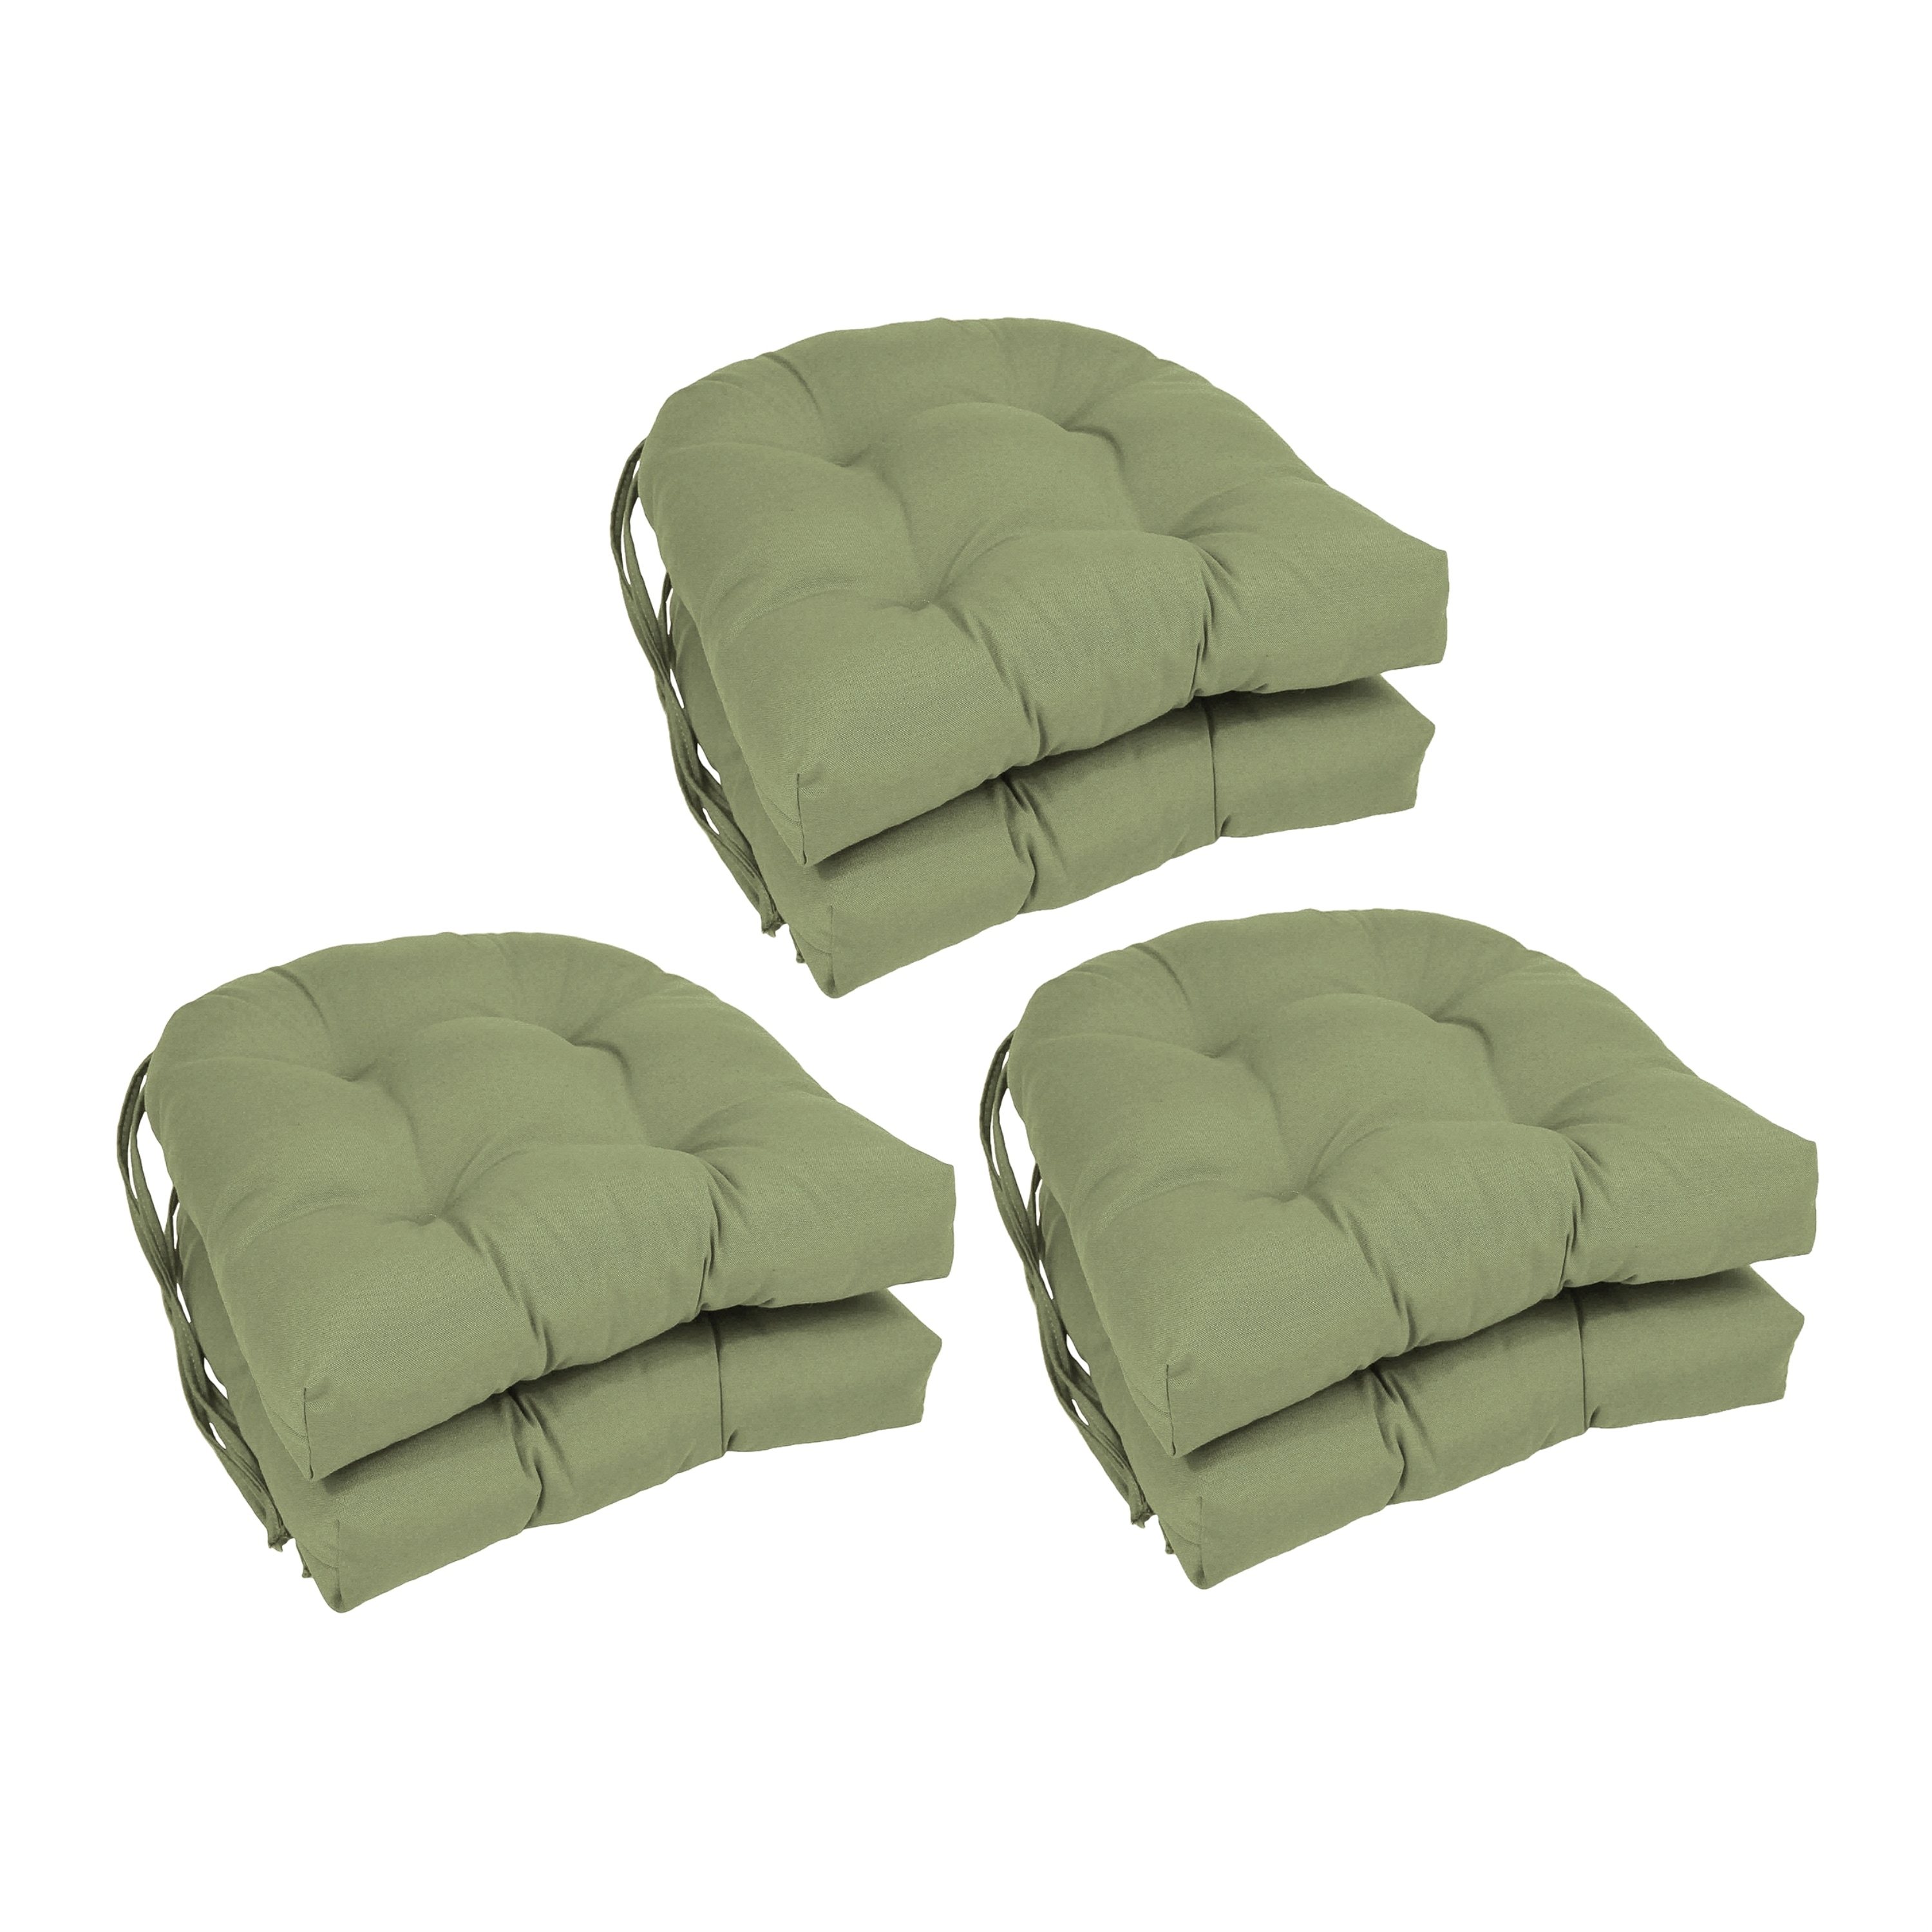 https://ak1.ostkcdn.com/images/products/is/images/direct/0ca81c1c9f29977fed96bb7b3f94d2443899f852/16-inch-U-Shaped-Indoor-Chair-Cushions-%28Set-of-2%2C-4%2C-or-6%29.jpg